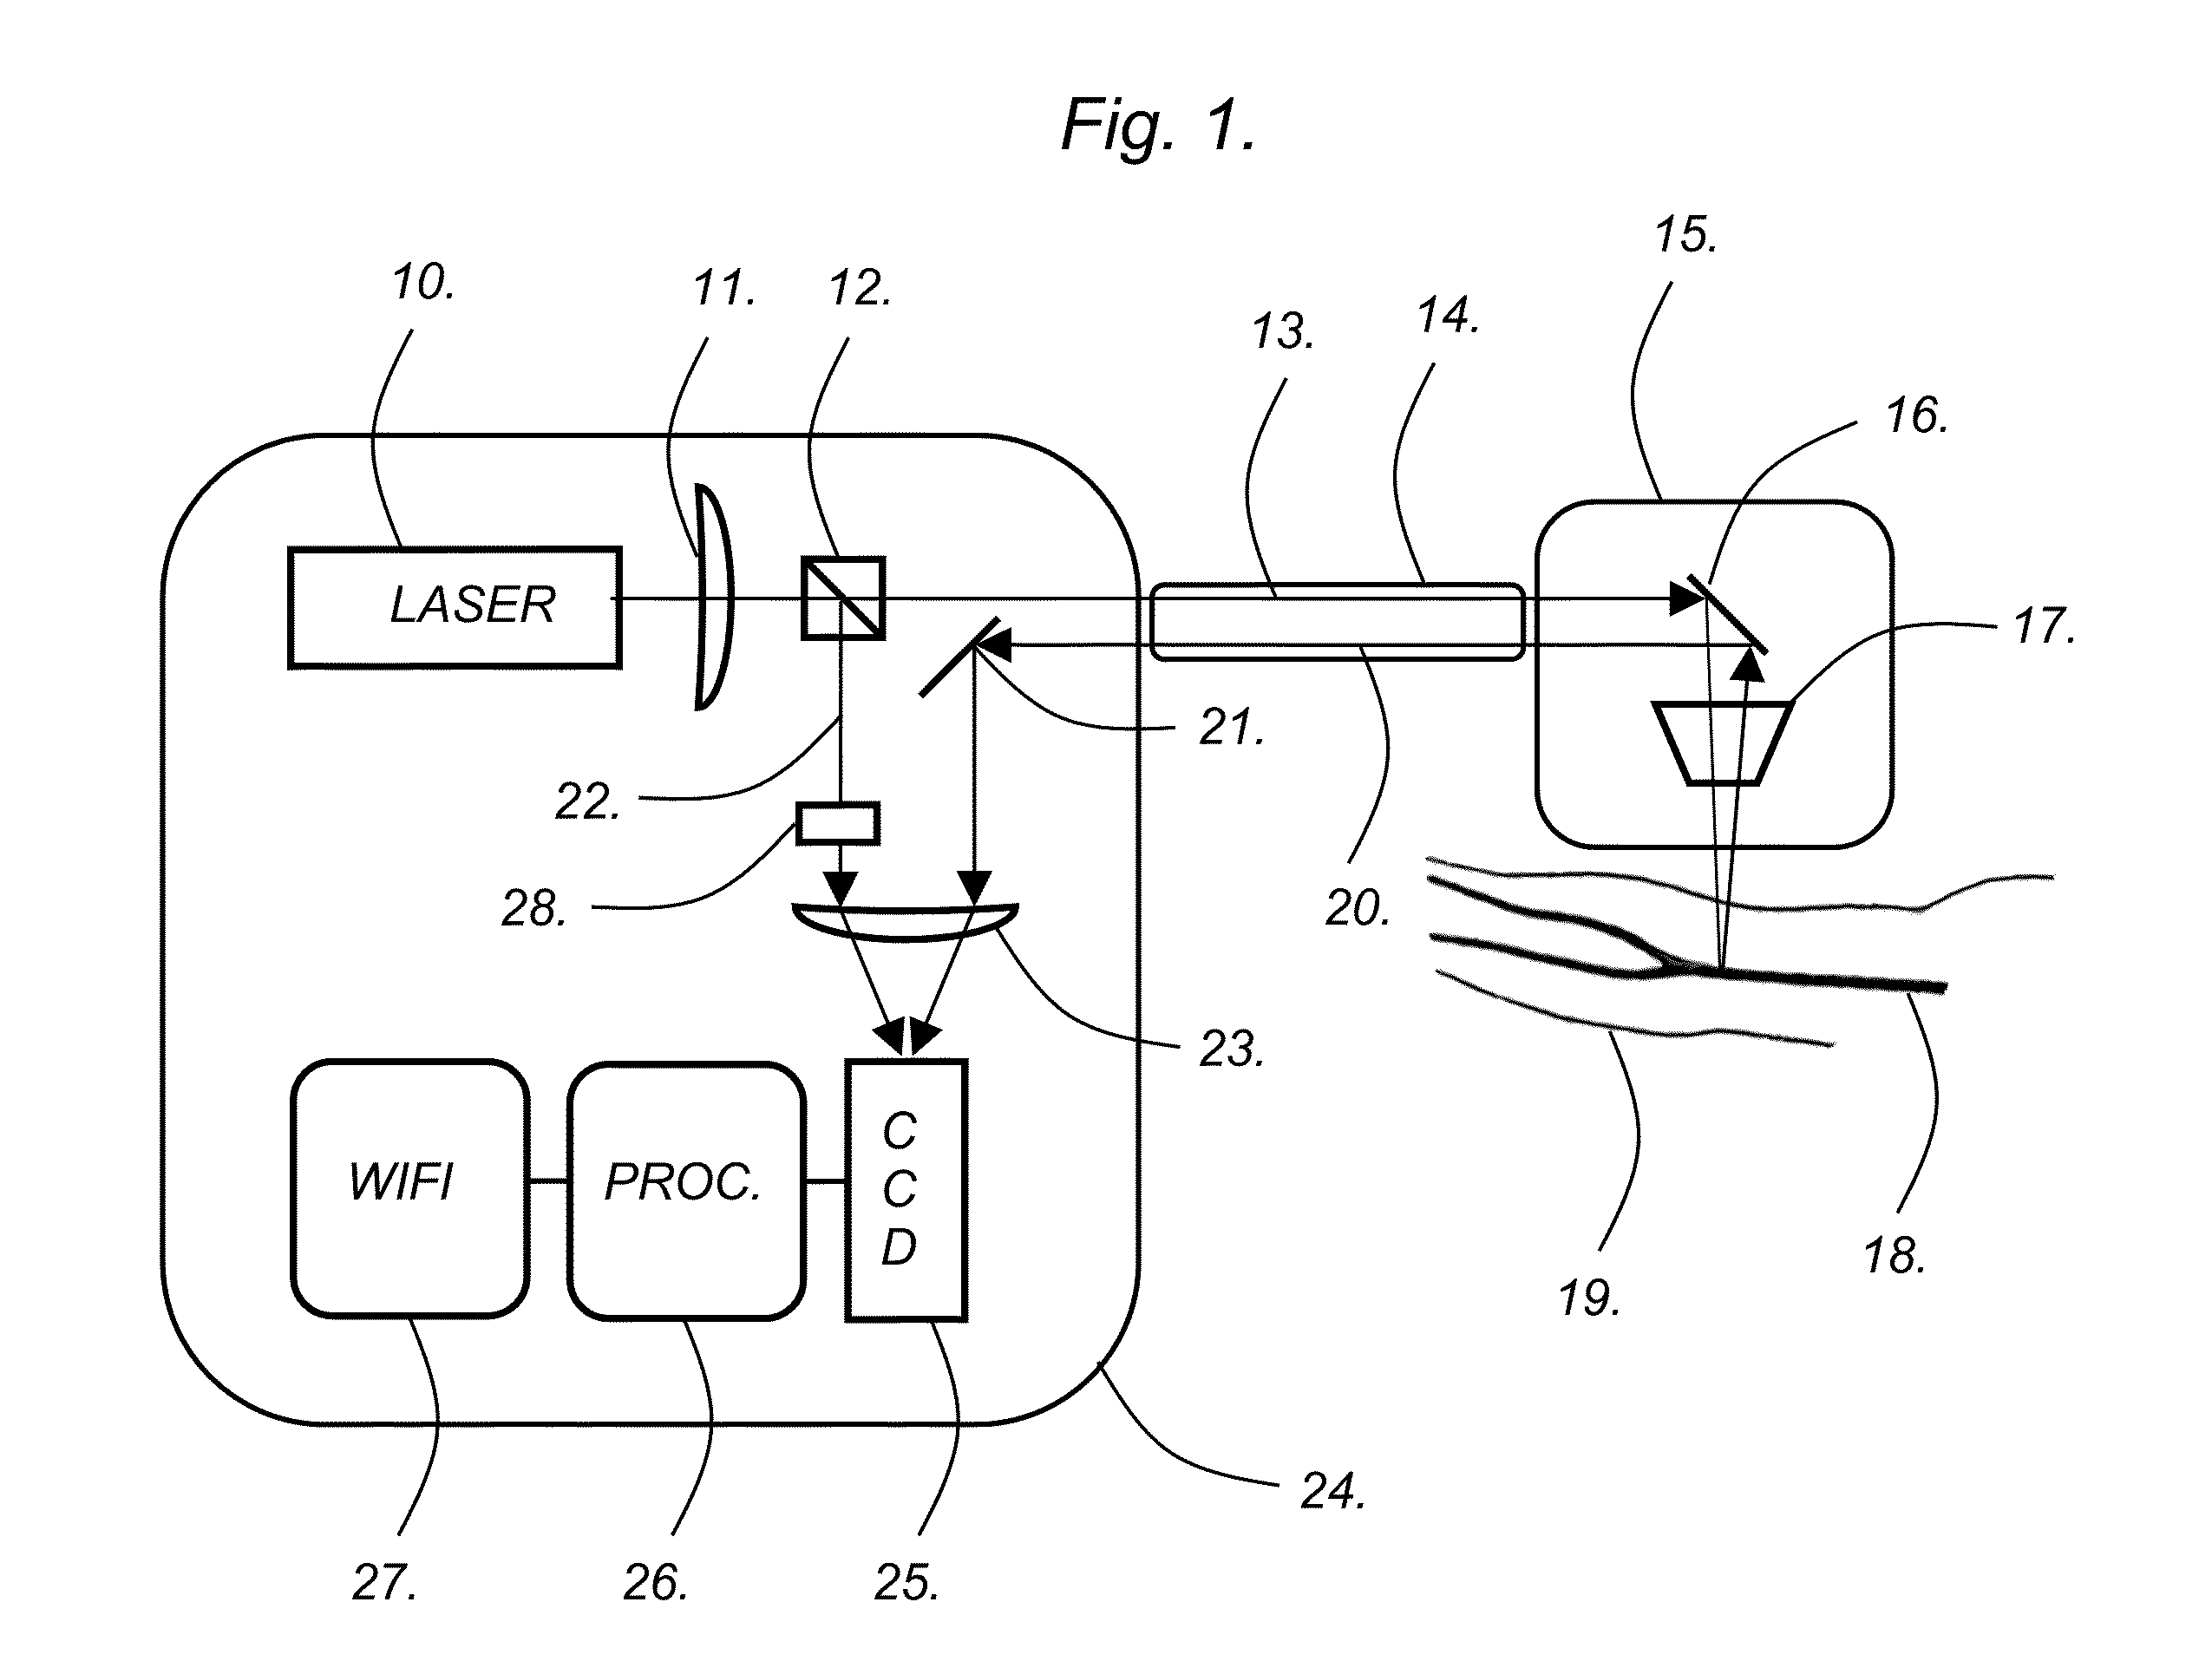 Continuous, non-invasive, optical blood pressure monitoring system